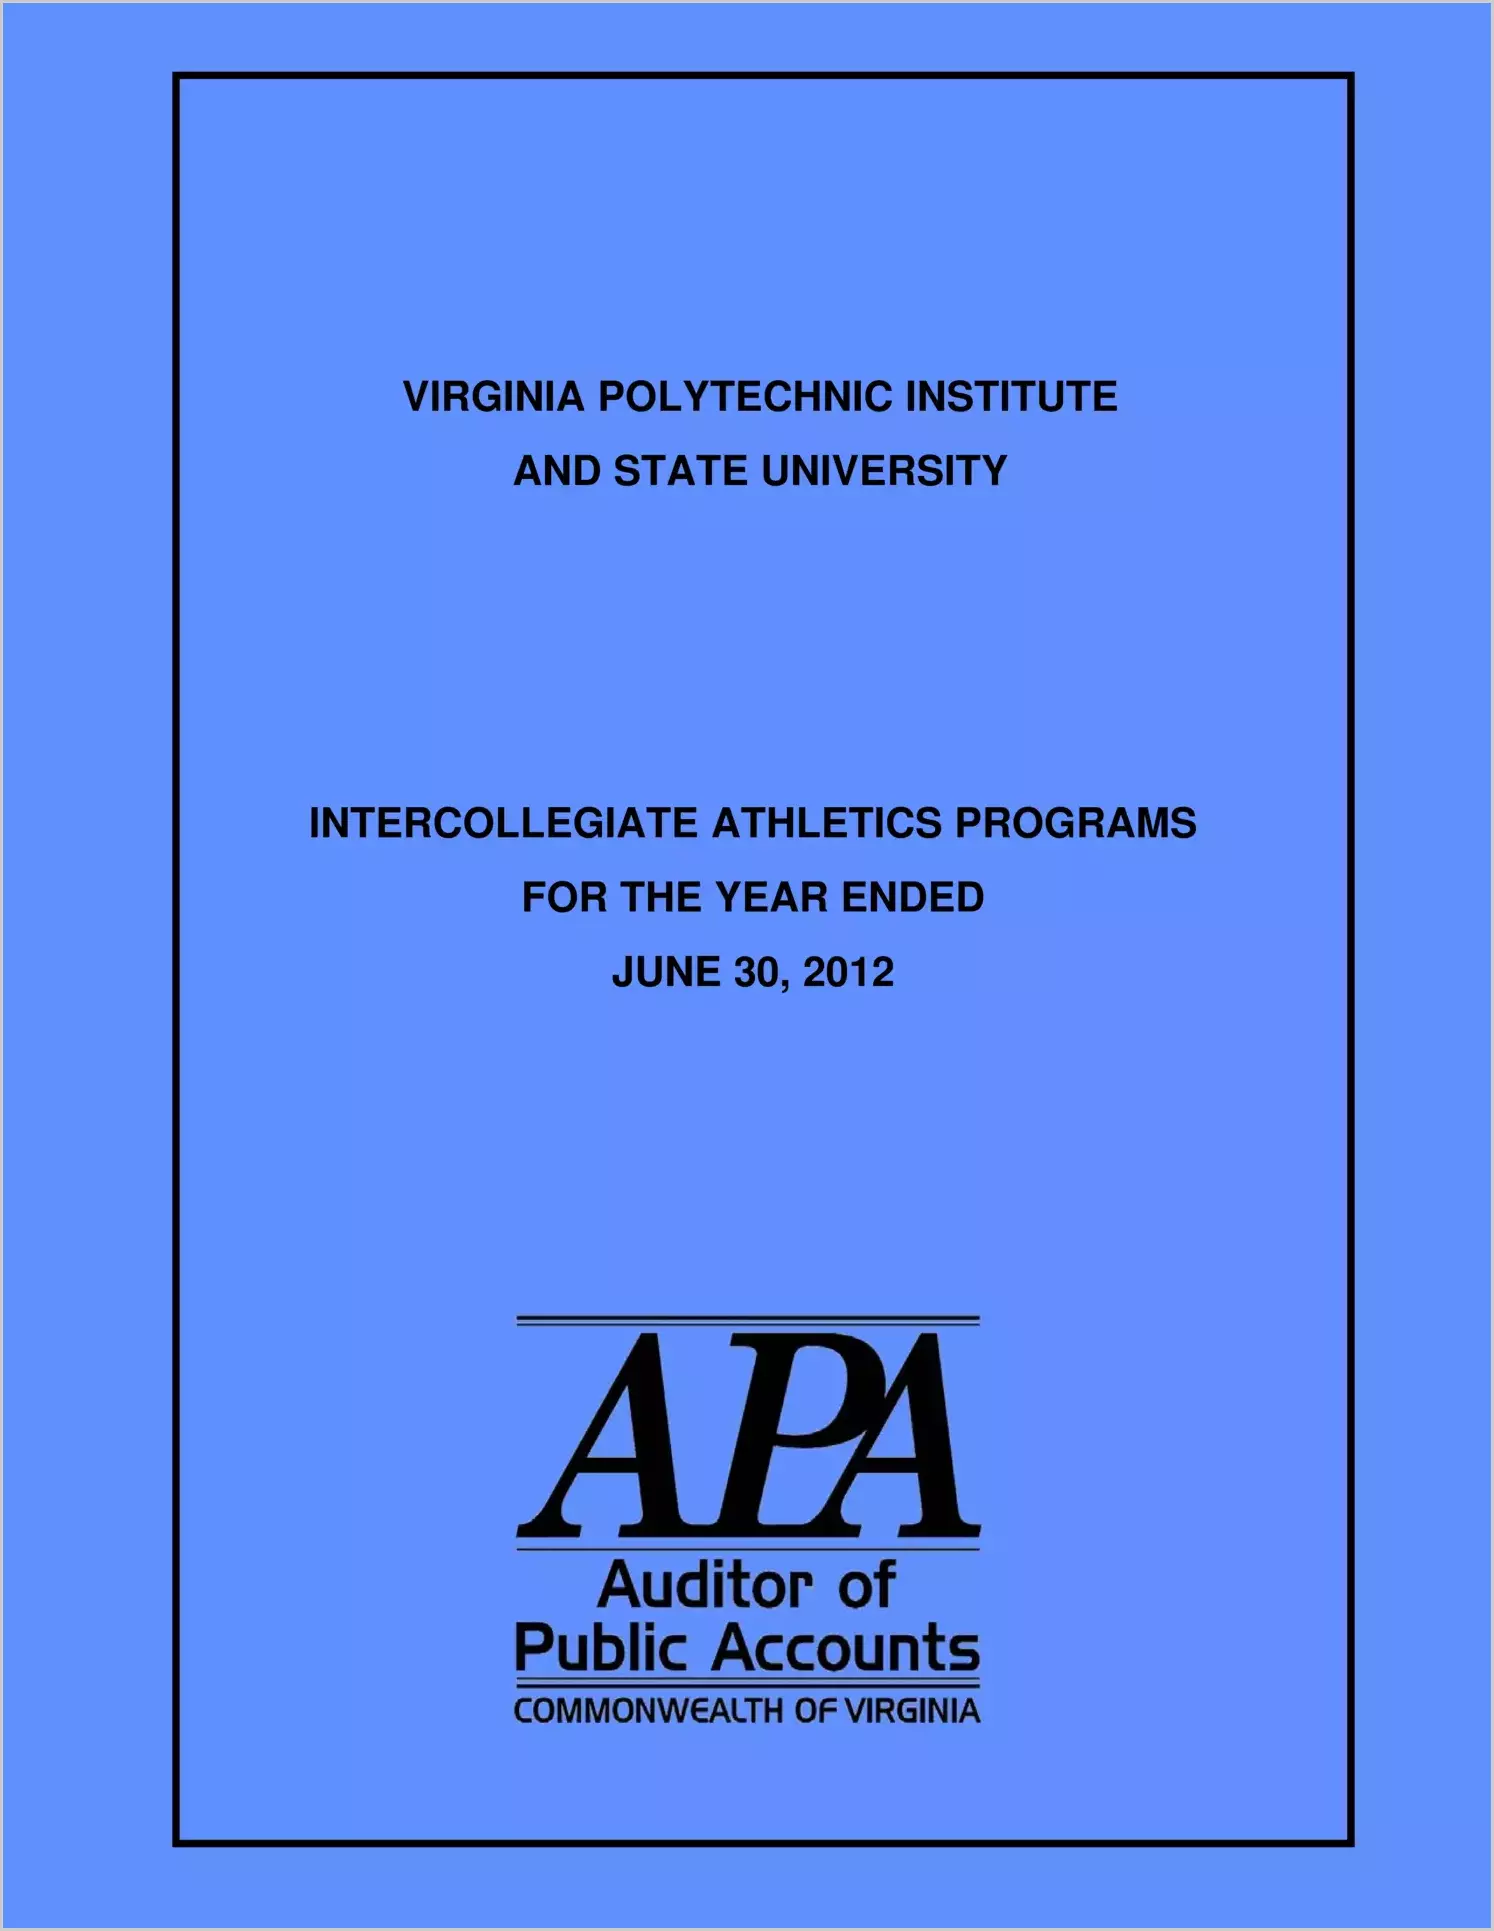 Virginia Polytechnic Institute and State University Intercollegiate Athletic Programs for the year ended June 30, 2012